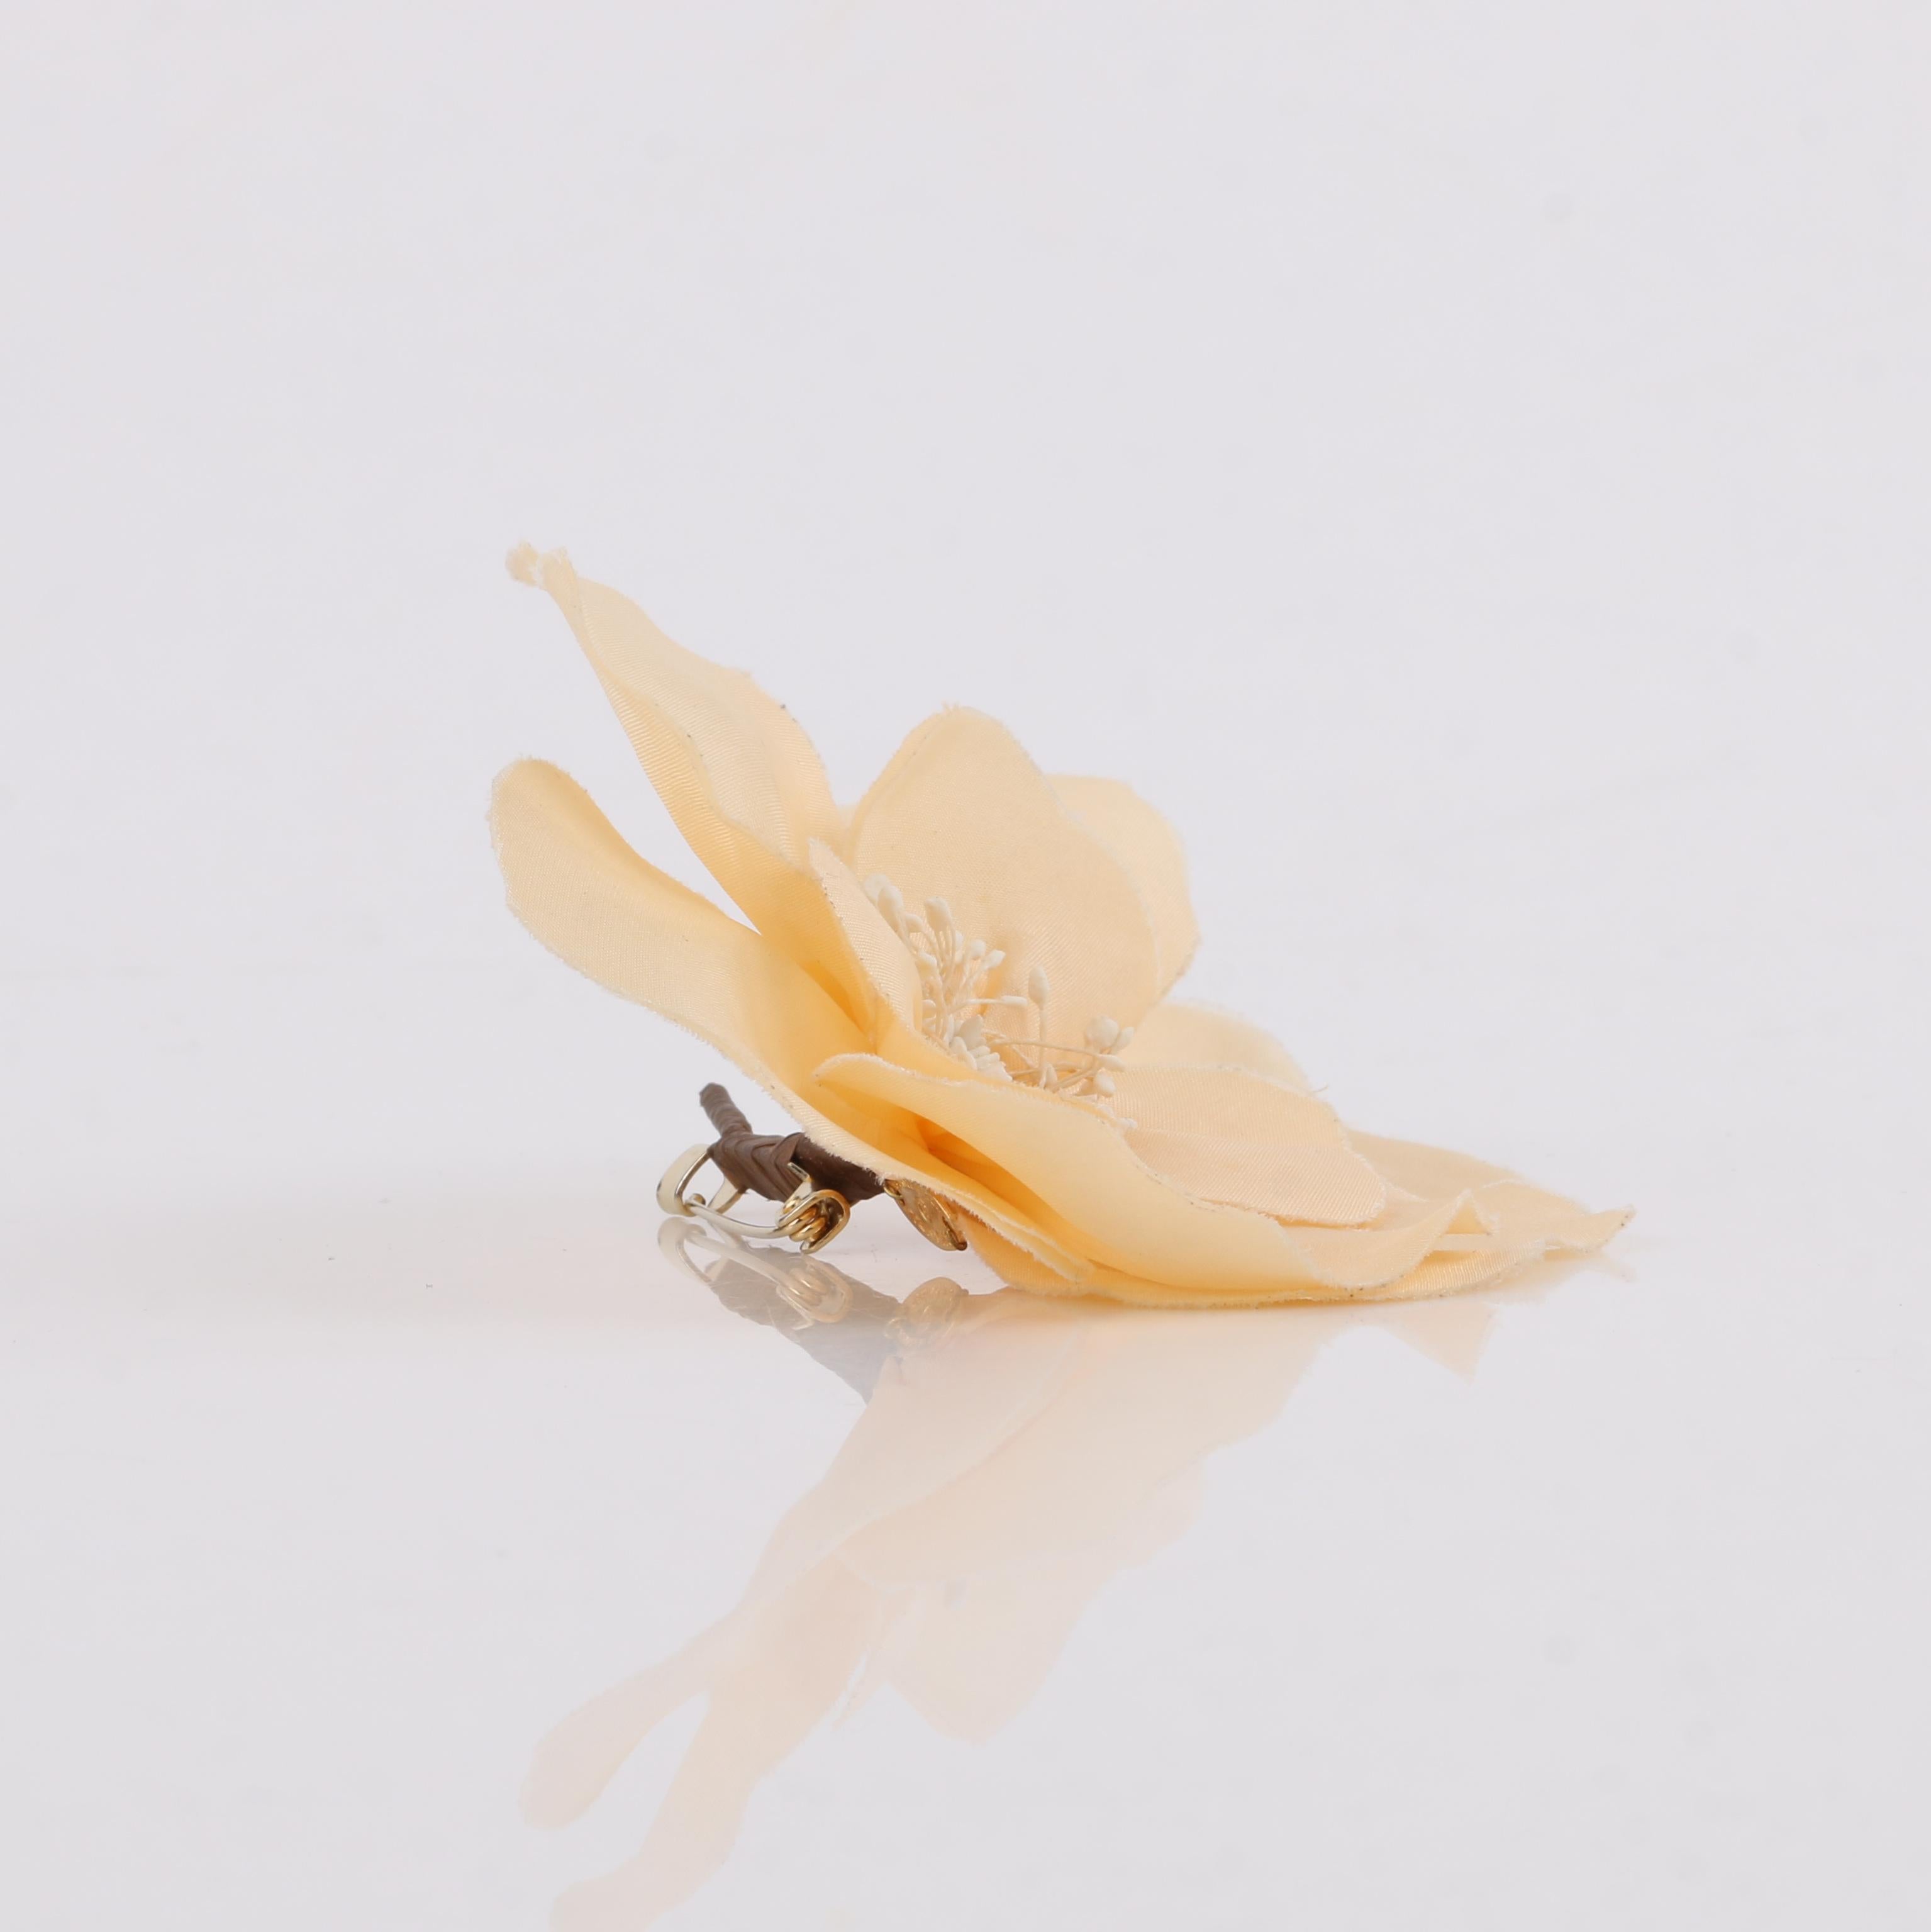 CHANEL Ivory Camellia Flower Brooch Pin + Box 5